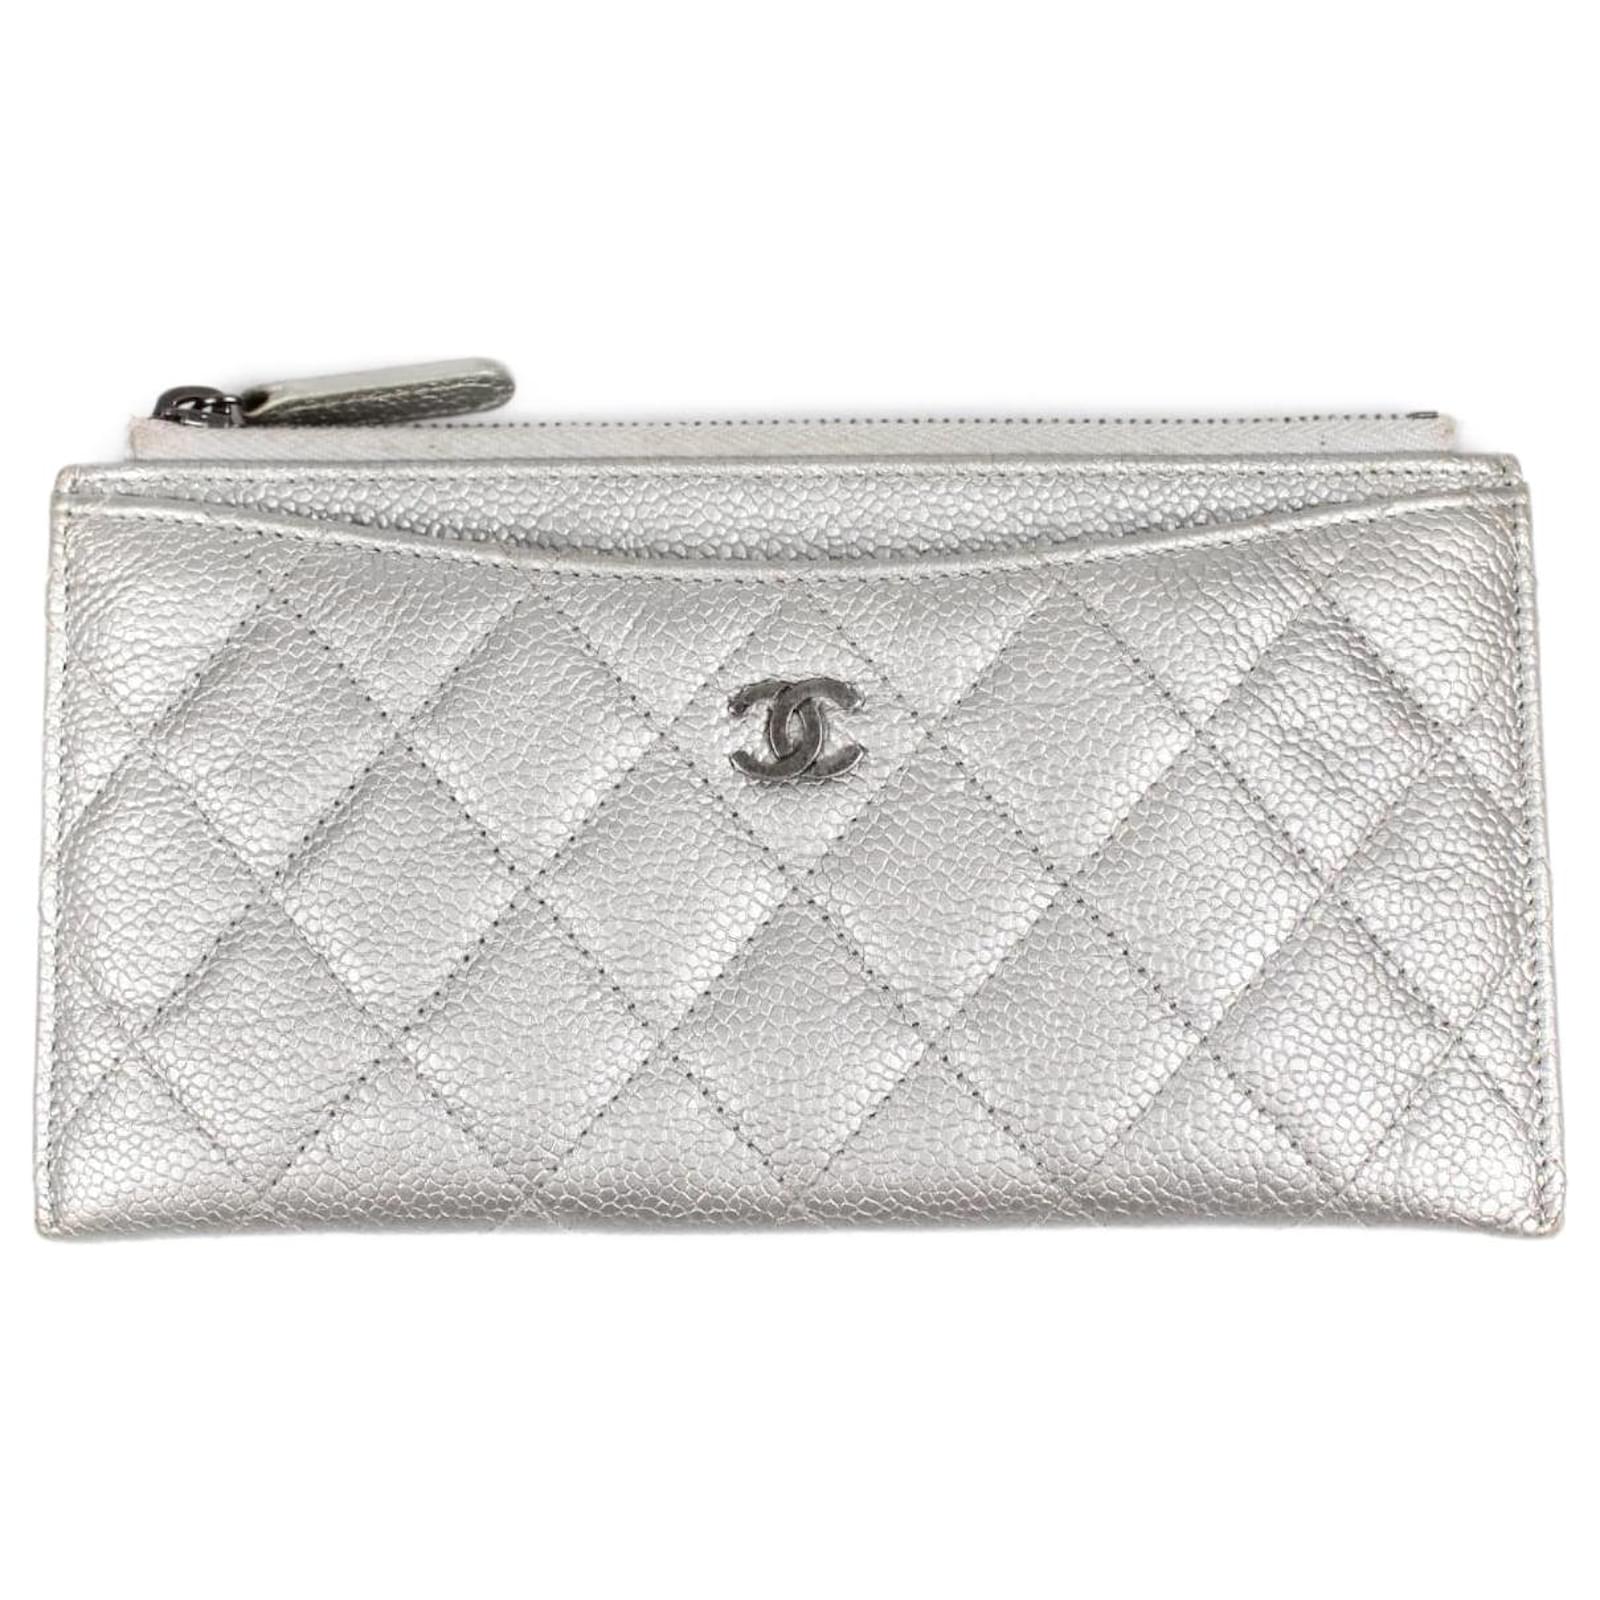 Chanel Classic Grained Leather Card Holder